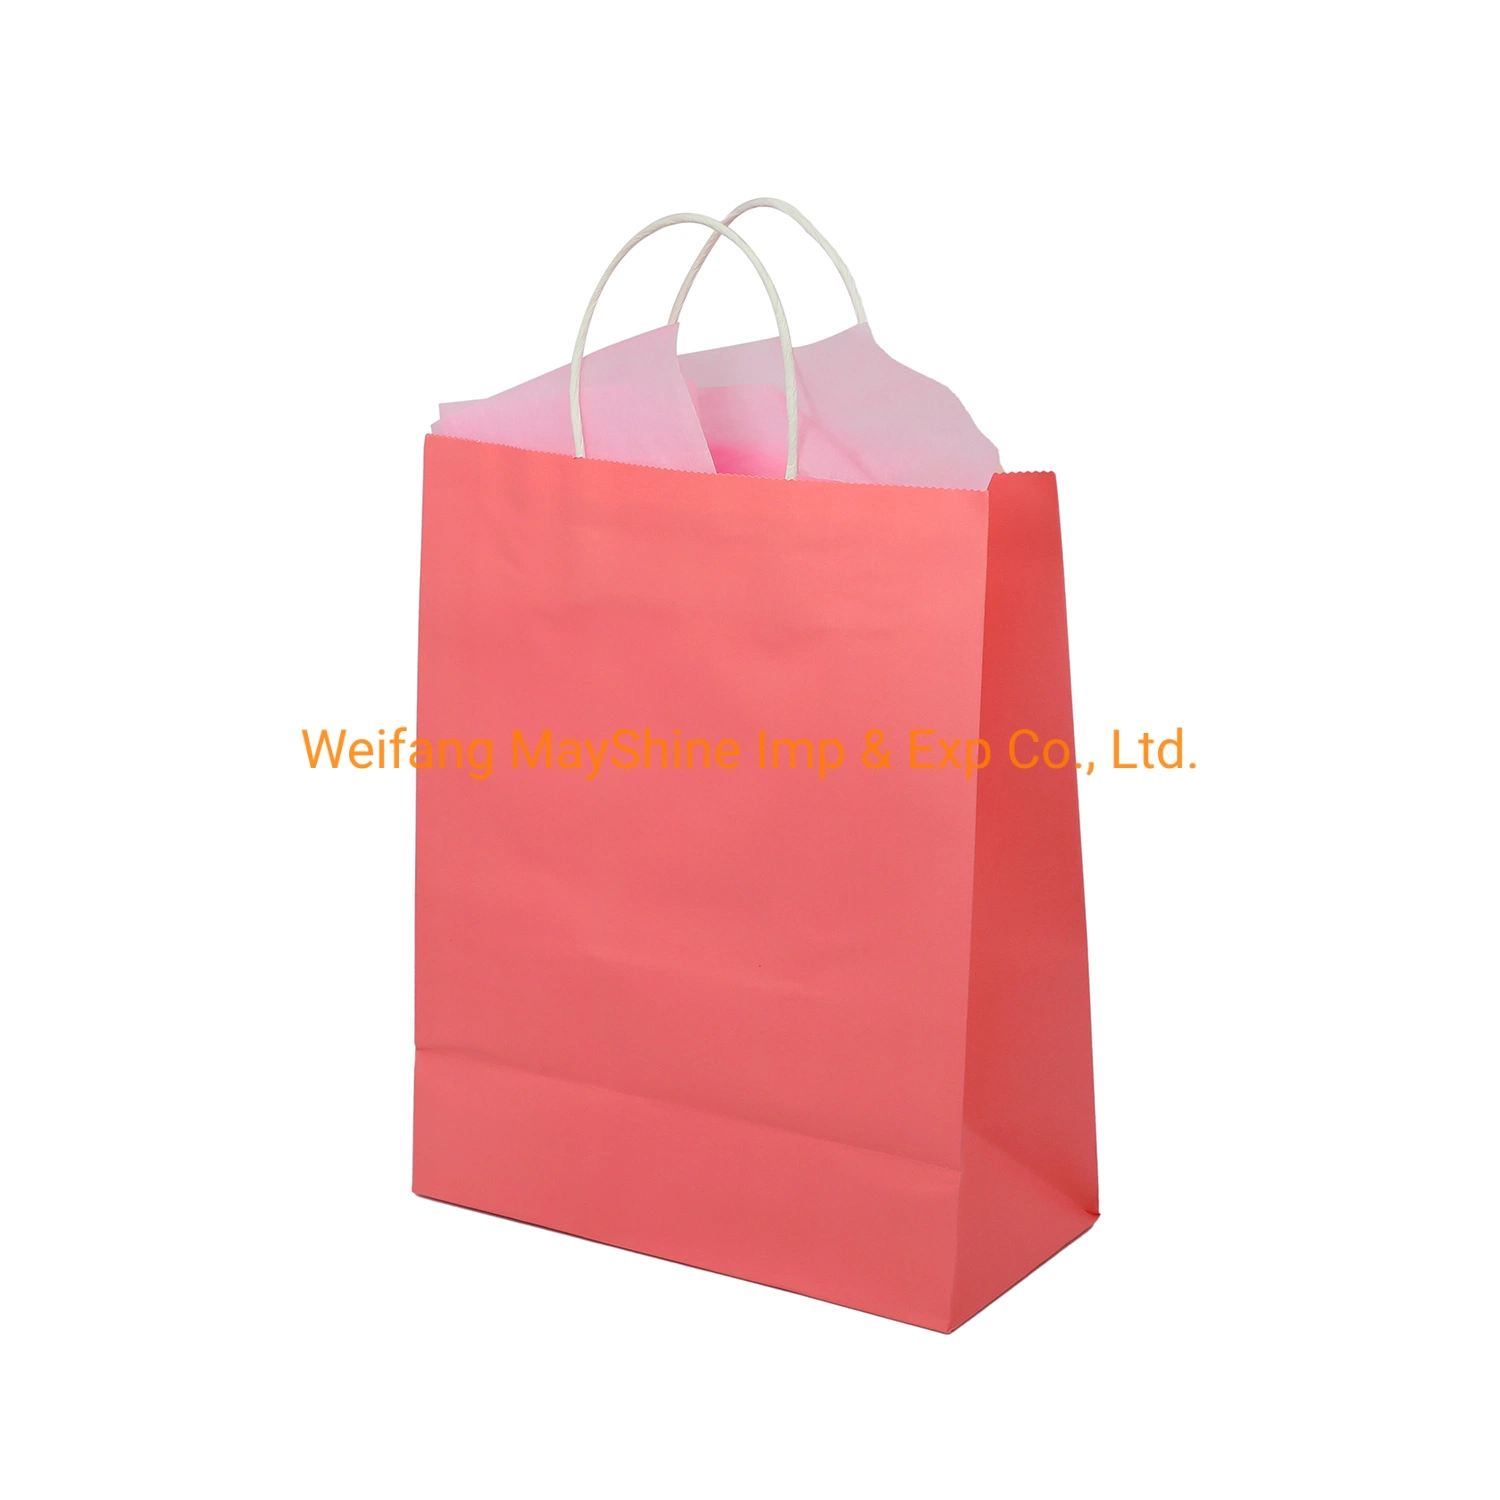 Wholesale Luxury Custom Printing Kraft Paper Shopping Packaging Tote Gift Bags for Cosmetic/Clothing/ Gift